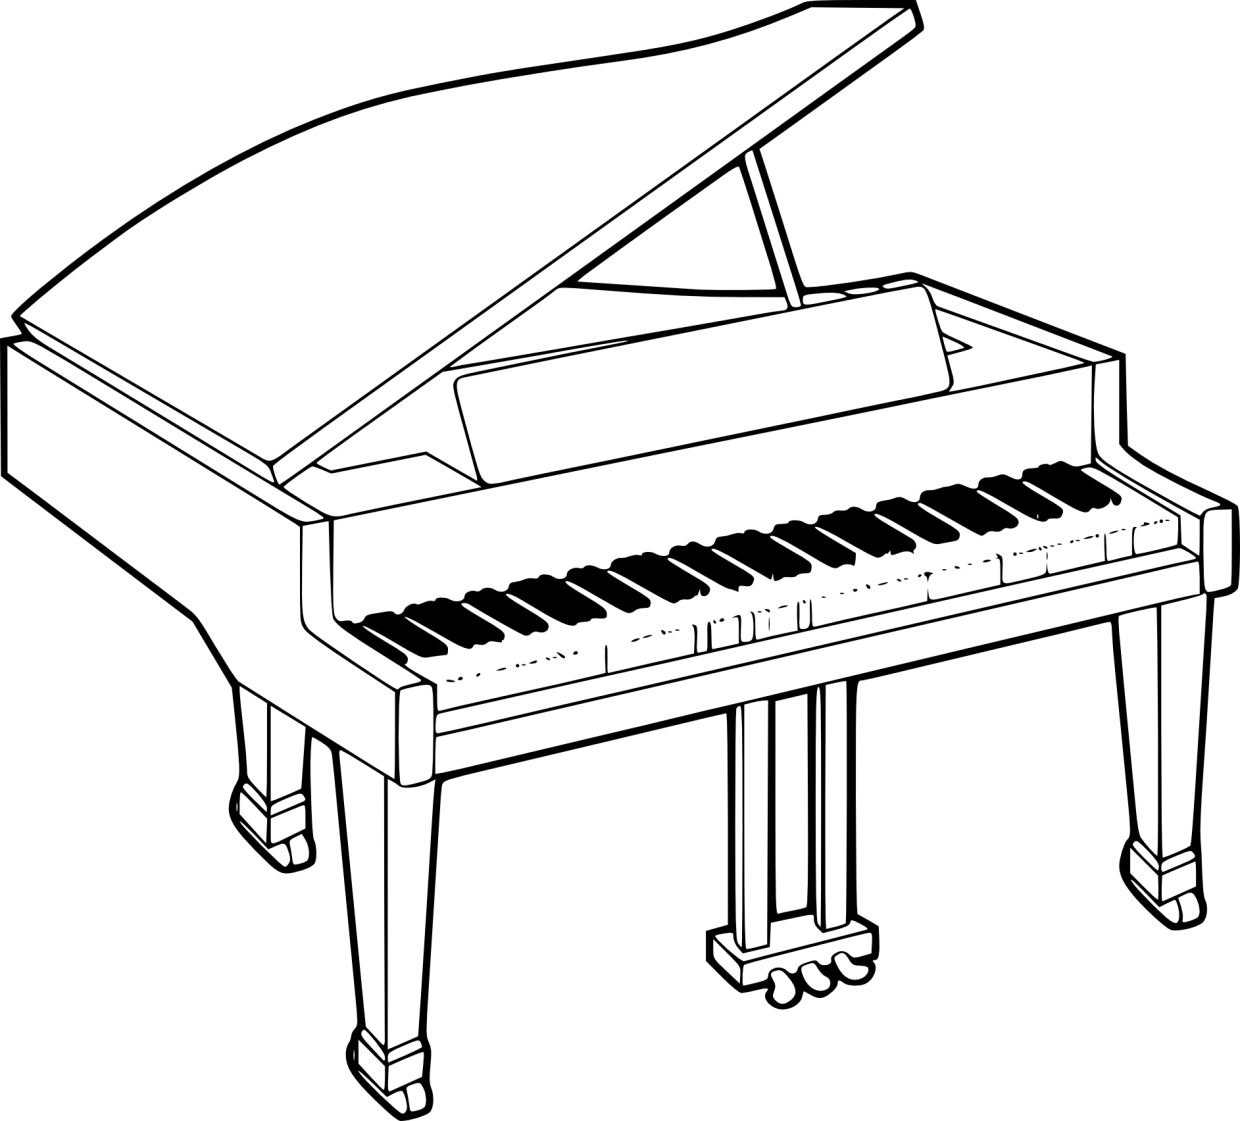 Piano Coloring Pages - Free Printable Sheets for Kids | GBcoloring